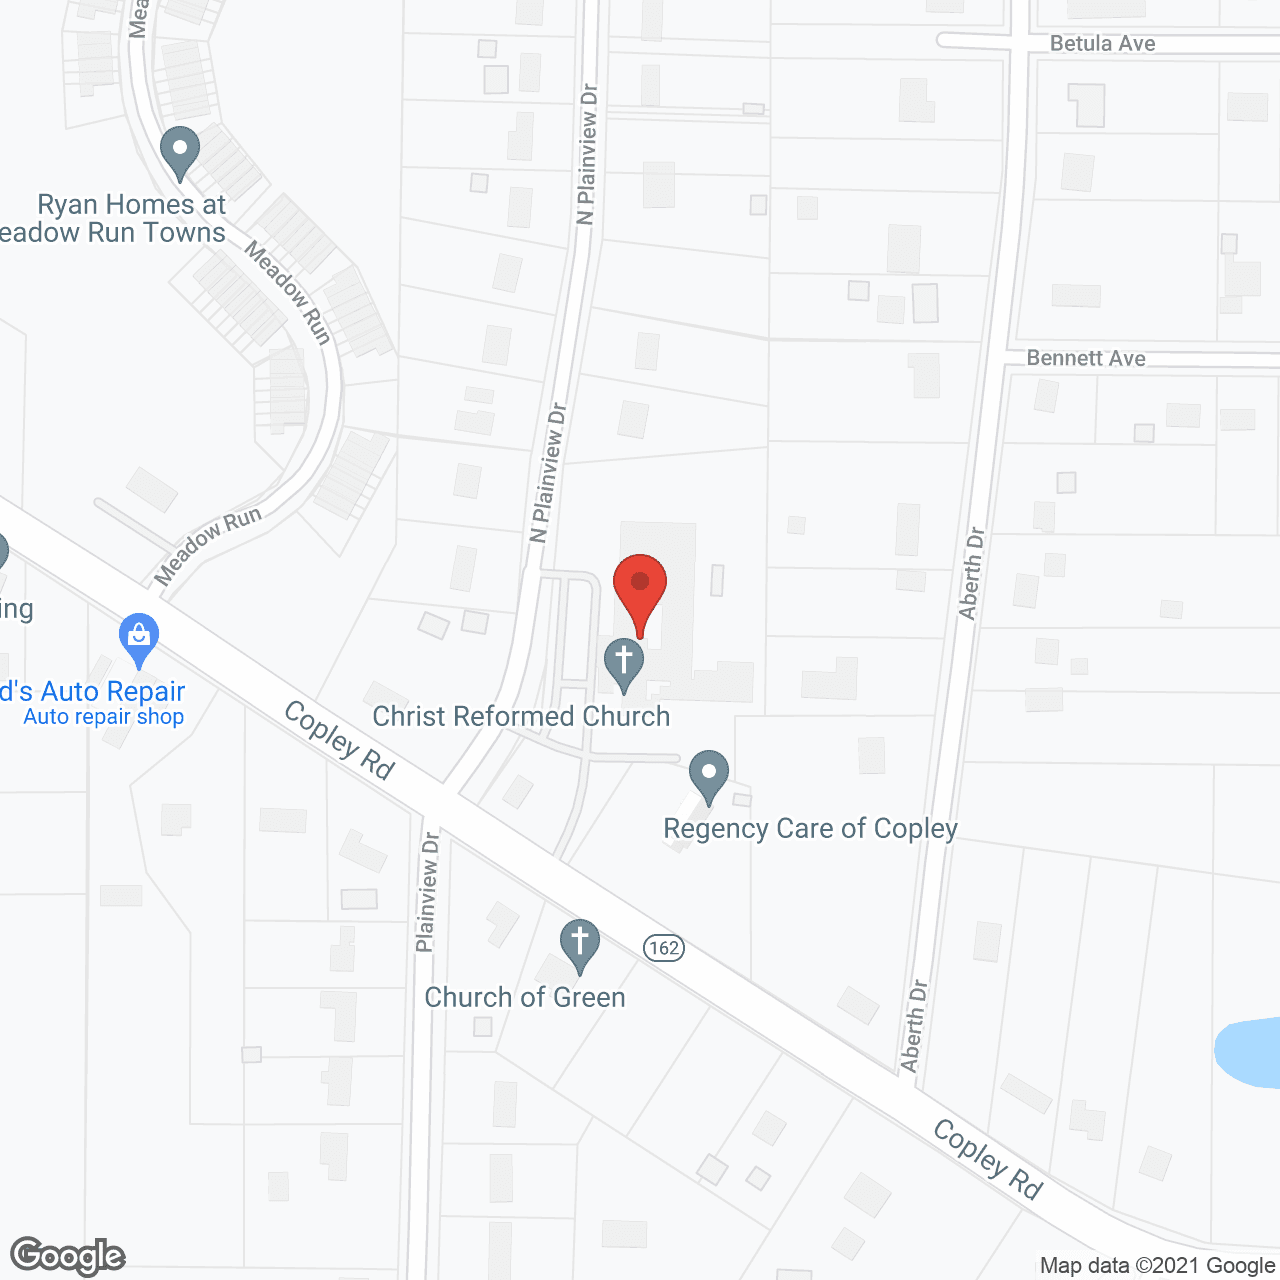 Sapphire Health and RehabContact: Administrator in google map